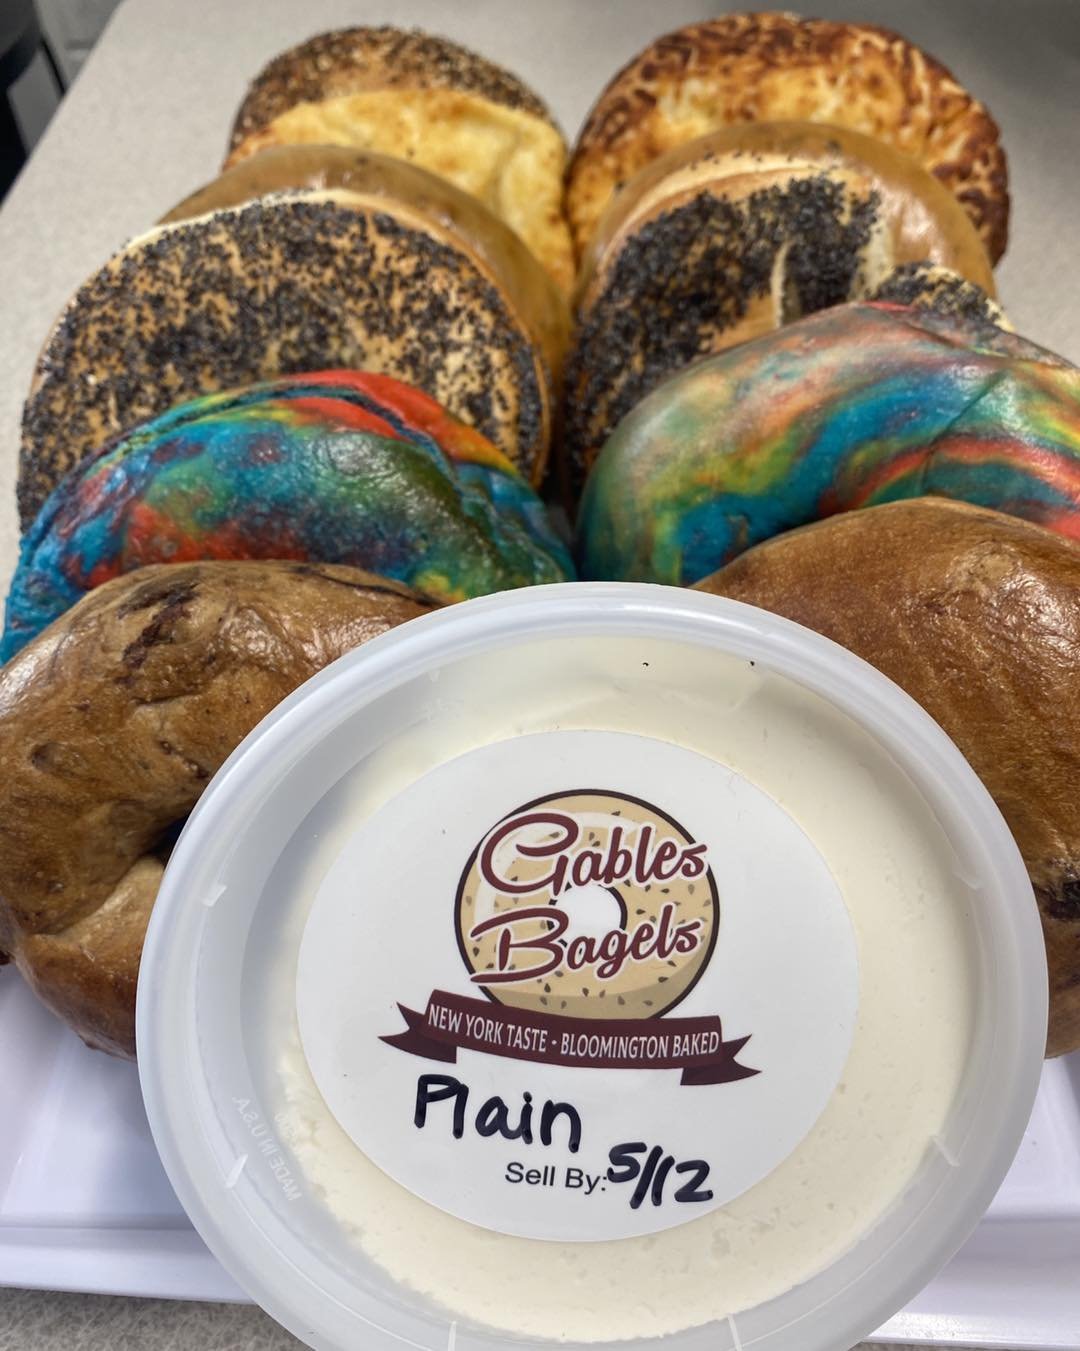 BAGELS! that was the email that went out this morning at Seven Oaks Classical. 

There are not enough words to express our gratitude to Ed Schwartzman for his very generous donation for our faculty &amp; staff for Teacher Appreciation Week!

We love 